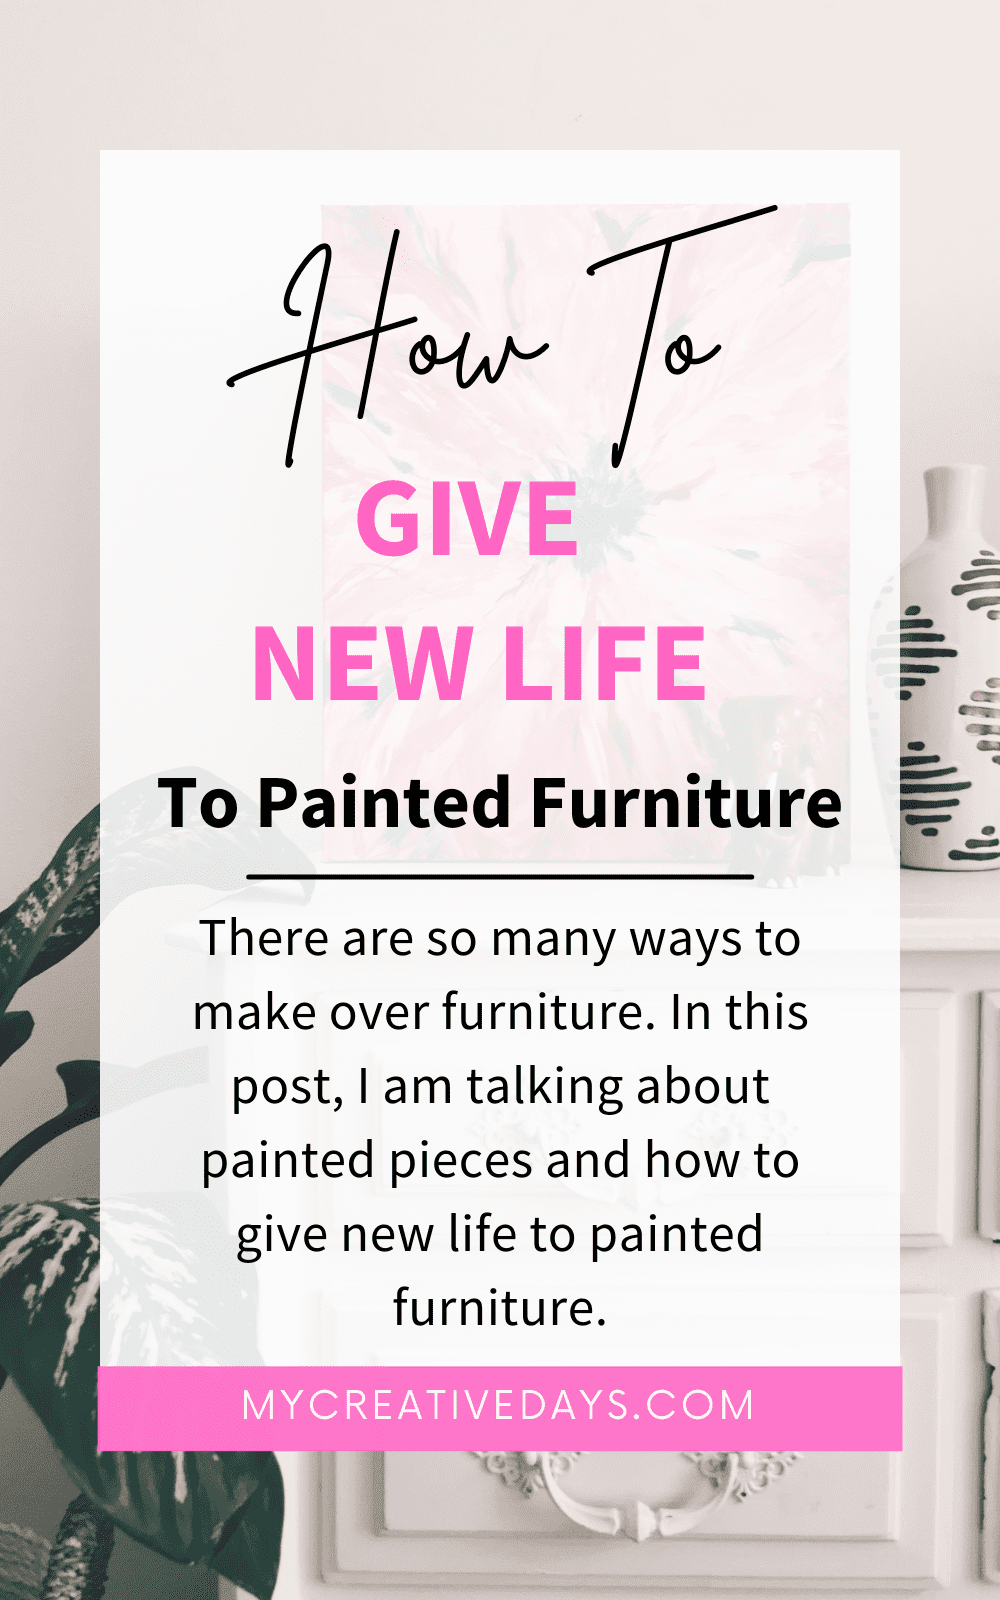 There are so many ways to make over furniture. In this post, I am talking about painted pieces and how to give new life to painted furniture.